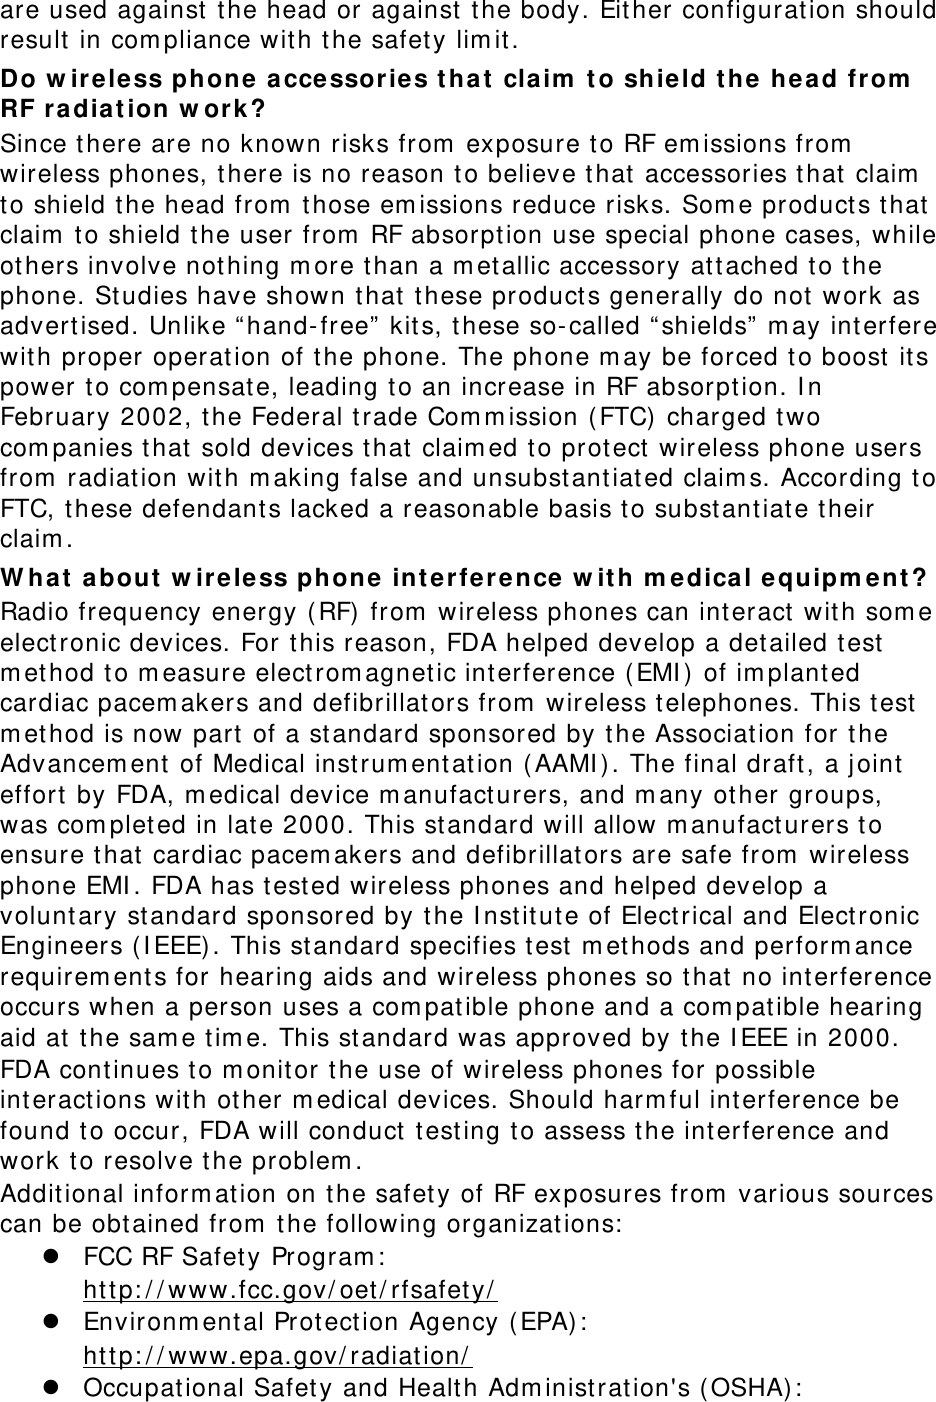 are used against the head or against  t he body. Either configurat ion should result  in com pliance wit h t he safet y lim it. Do w irele ss phone a ccessorie s t ha t  cla im  t o shield t he he ad fr om  RF radiat ion w ork ? Since t here are no known risks from  exposure to RF em issions from  wireless phones, t here is no reason t o believe that accessories that  claim  to shield t he head from  those em issions reduce risks. Som e product s t hat claim  t o shield t he user from  RF absorption use special phone cases, while ot hers involve not hing m ore than a m et allic accessory at t ached to t he phone. St udies have shown t hat  t hese product s generally do not work as advert ised. Unlike “ hand- free”  kits, t hese so- called “ shields”  m ay int erfere wit h proper operat ion of t he phone. The phone m ay be forced t o boost  its power t o com pensat e, leading t o an increase in RF absorption. I n February 2002, the Federal t rade Com m ission ( FTC) charged two com panies that  sold devices t hat claim ed to prot ect  wireless phone users from  radiat ion with m aking false and unsubst ant iat ed claim s. According to FTC, these defendants lacked a reasonable basis t o subst antiate their claim . W ha t  about  w ireless phone int e rfere nce  w it h m edica l equipm ent ? Radio frequency energy ( RF)  from  wireless phones can int eract  with som e elect ronic devices. For t his reason, FDA helped develop a det ailed test  m et hod t o m easure elect rom agnet ic int erference ( EMI )  of im planted cardiac pacem akers and defibrillat ors from  wireless telephones. This t est m et hod is now part  of a st andard sponsored by t he Association for t he Advancem ent of Medical instrum ent at ion ( AAMI ) . The final draft, a joint effort  by FDA, m edical device m anufact urers, and m any ot her groups, was com plet ed in lat e 2000. This standard will allow m anufact urers to ensure that  cardiac pacem akers and defibrillat ors are safe from  wireless phone EMI . FDA has t ested wireless phones and helped develop a volunt ary st andard sponsored by t he I nstit ut e of Elect rical and Elect ronic Engineers ( I EEE) . This st andard specifies t est  m et hods and perform ance requirem ents for hearing aids and wireless phones so t hat  no int erference occurs when a person uses a com pat ible phone and a com patible hearing aid at  the sam e t im e. This st andard was approved by the I EEE in 2000. FDA cont inues t o m onitor t he use of wireless phones for possible int eract ions wit h ot her m edical devices. Should harm ful interference be found t o occur, FDA will conduct  test ing to assess the interference and work t o resolve the problem . Additional inform at ion on the safet y of RF exposures from  various sources can be obt ained from  t he following organizat ions:   FCC RF Safet y Program :   ht t p: / / www.fcc.gov/ oet / rfsafet y/   Environm ental Prot ect ion Agency ( EPA) :   ht t p: / / www.epa.gov/ radiat ion/   Occupat ional Safet y and Healt h Adm inistration&apos;s ( OSHA) :    